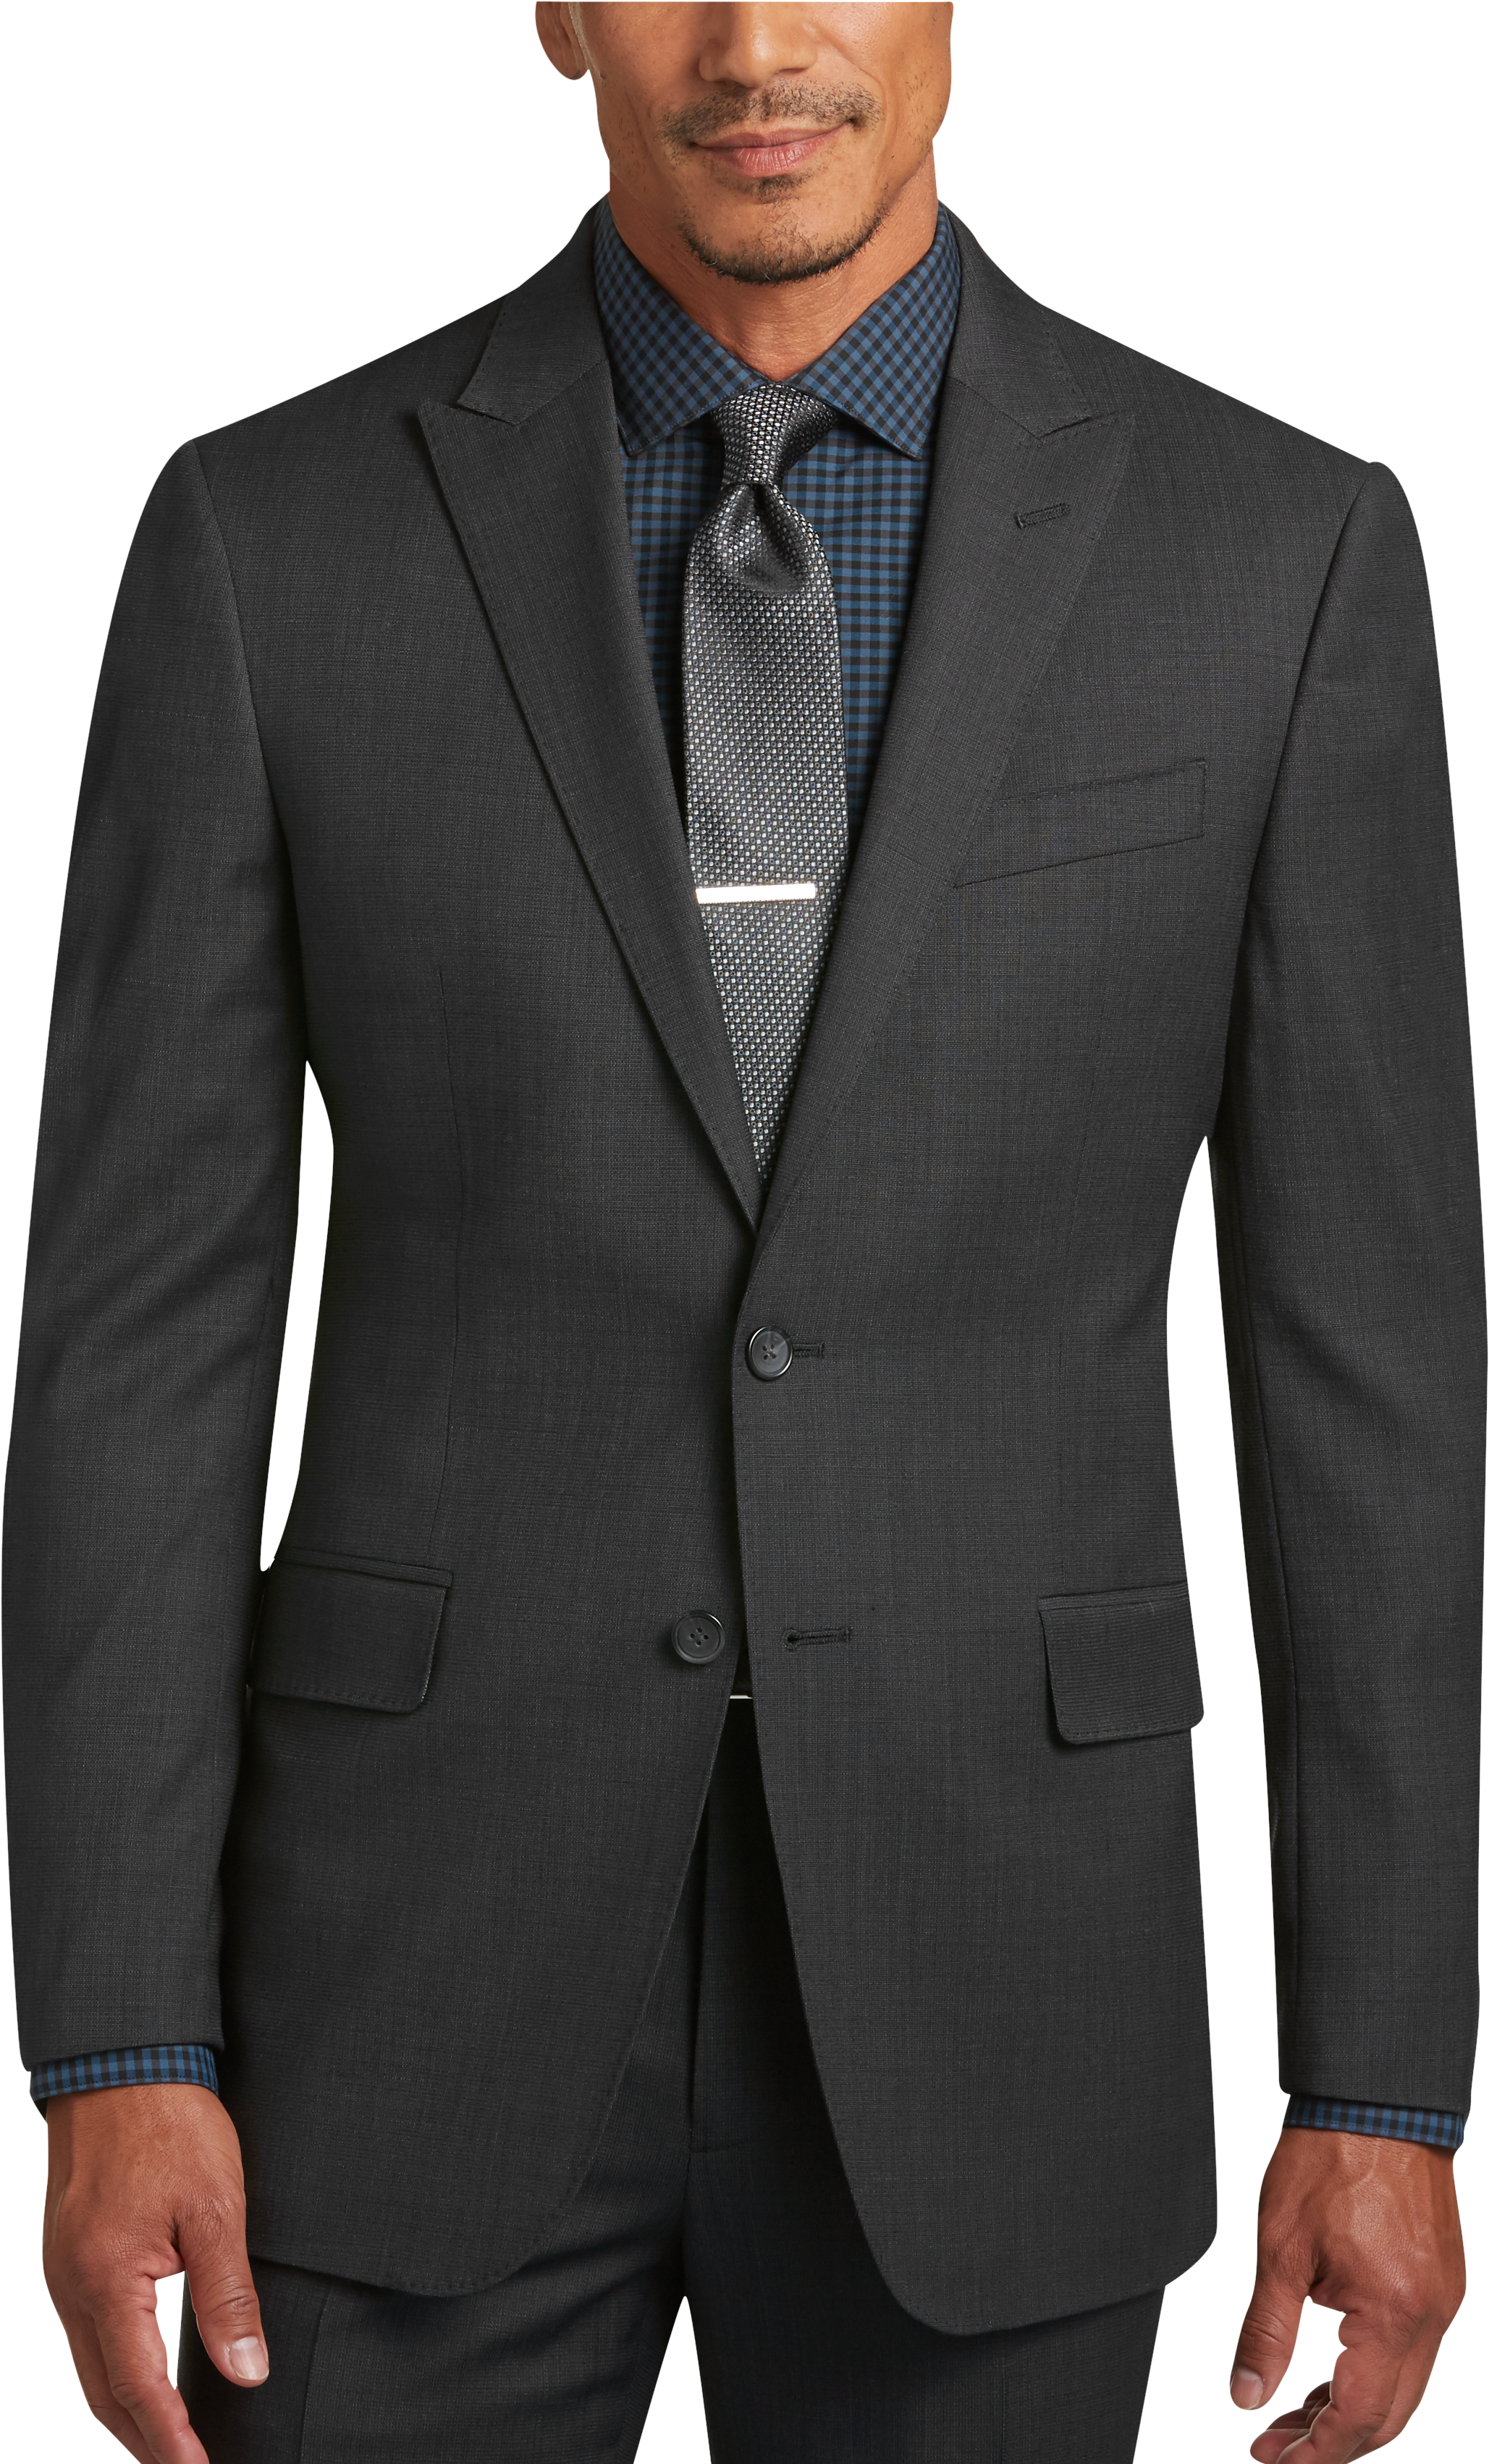 100% Wool Charcoal Tic Suit - Men's Suits - Awearness Kenneth Cole ...